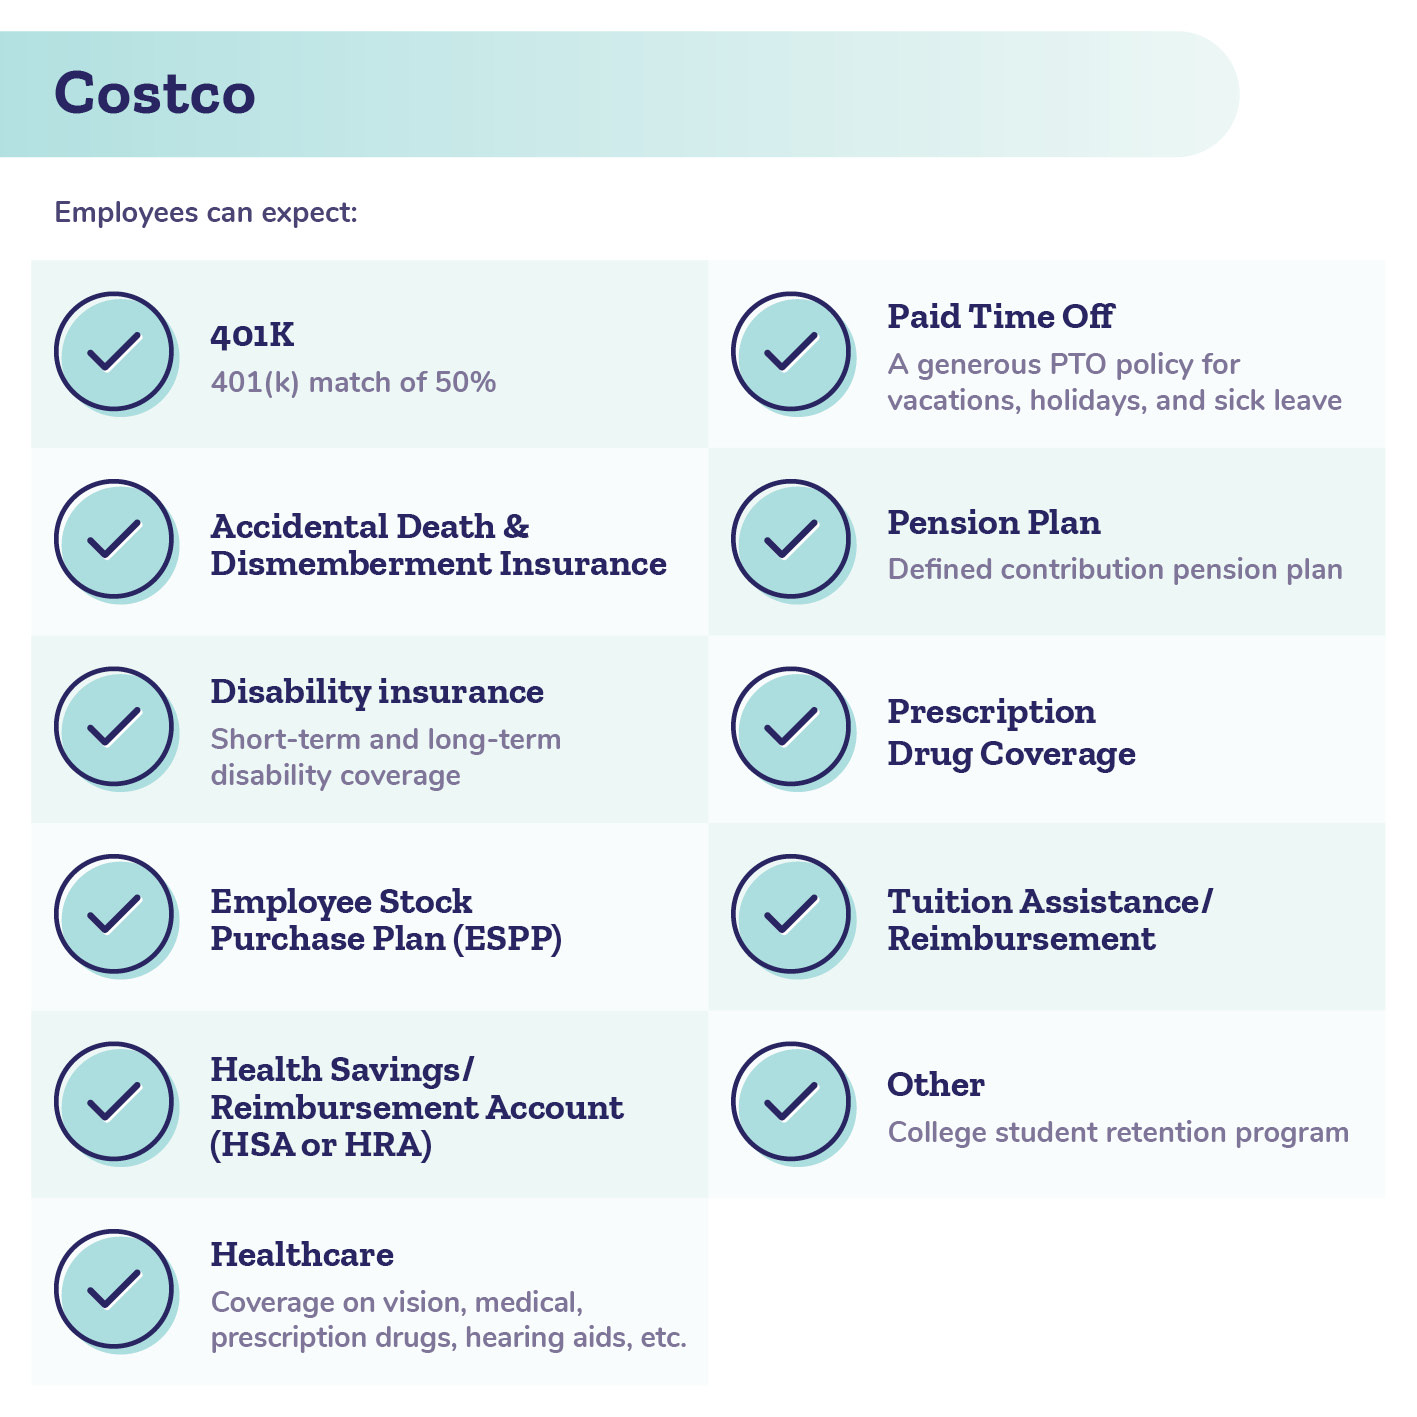 11 Costco Employee Benefits That Will Make You Want to Work There